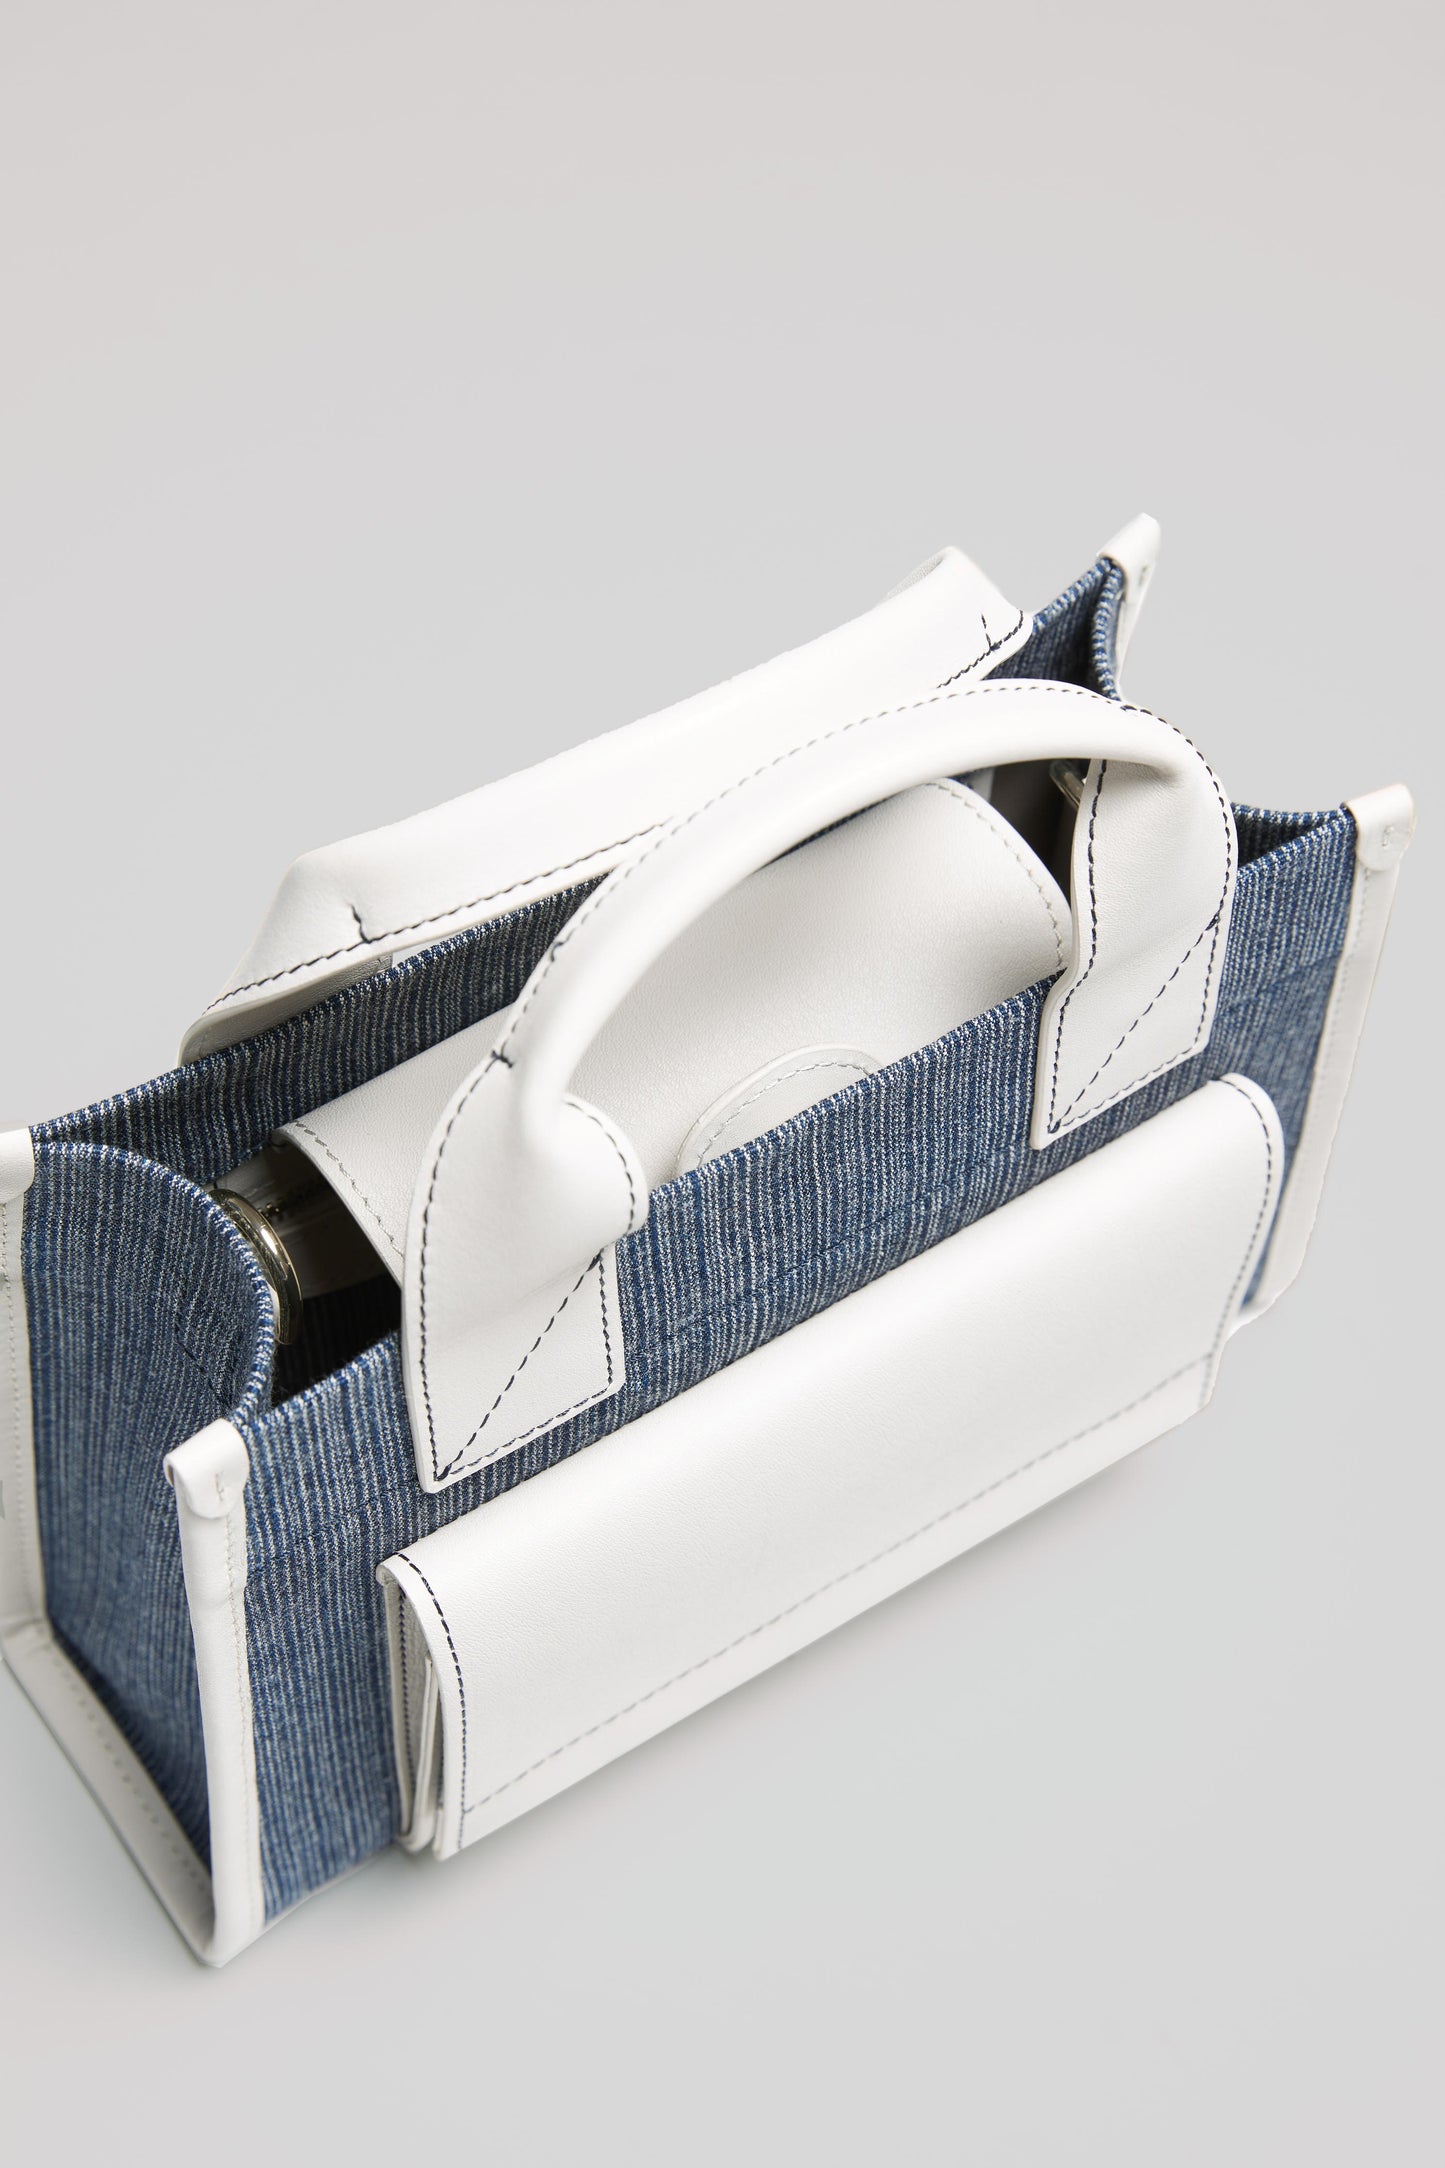 STITCHED POCKET MINI TOTE BAG IN MARINE AND OFF-WHITE